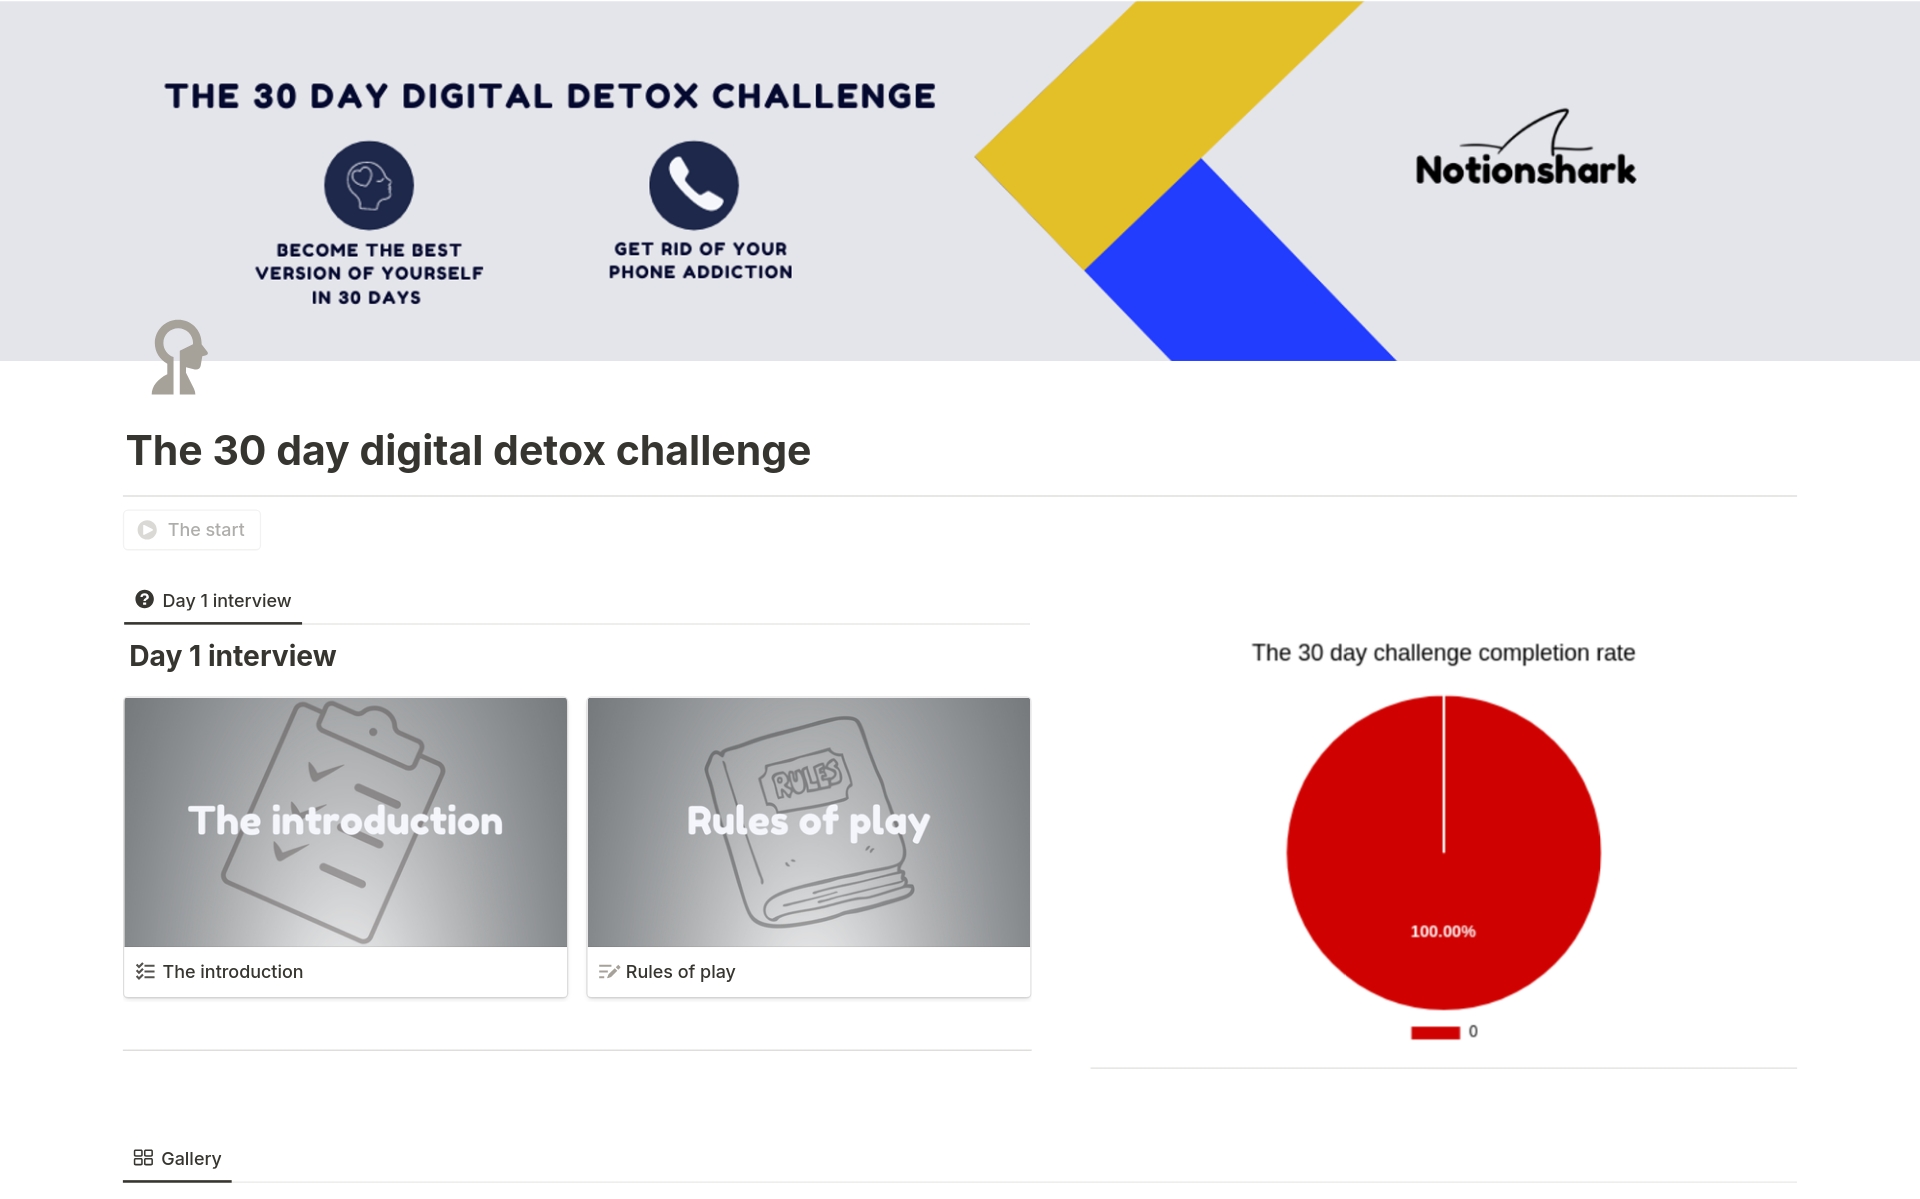 - 30 days filled with 4 challenges

- Challenges get harder as you progress

- 6 ultimate digital detox challenges included

- Implement new healthy habits into your life

- Dopamine detox strategies developed by experts

- Cut your screen time by 120 minutes if you complete it!